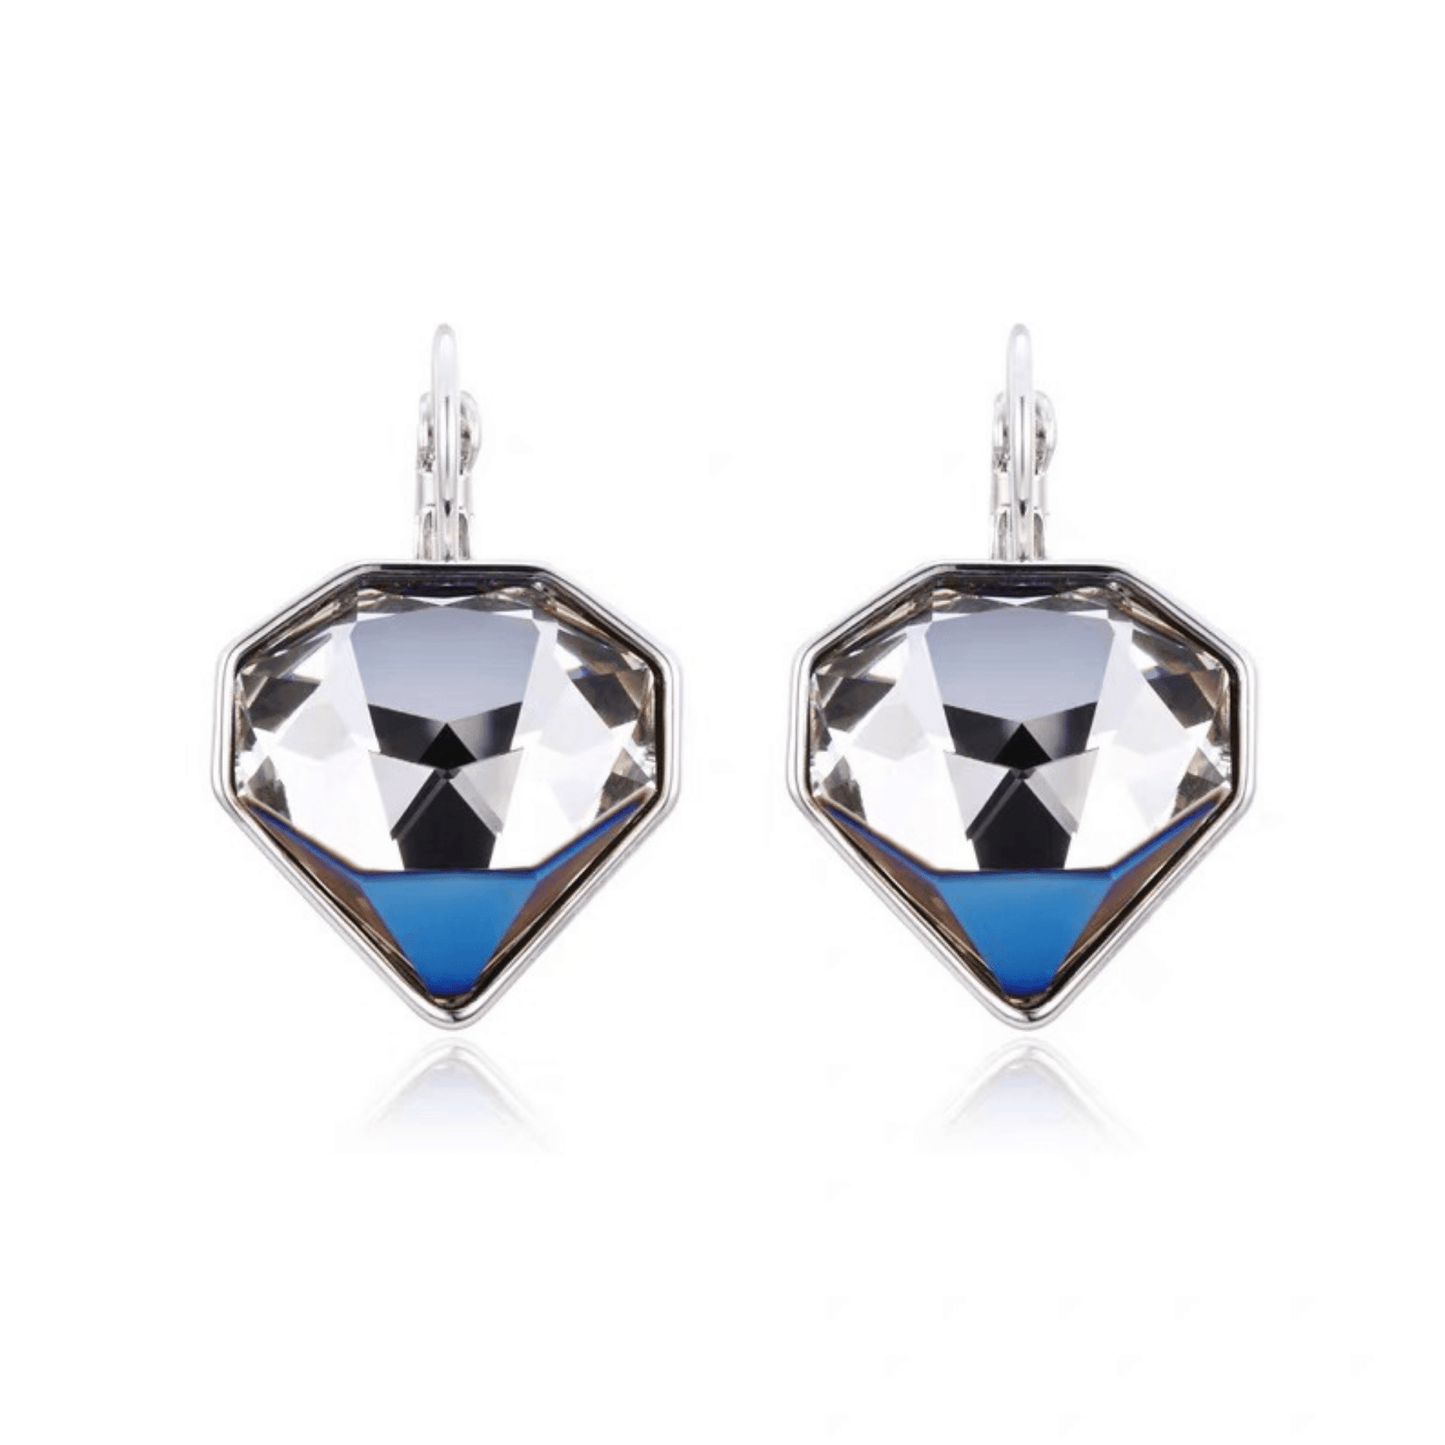 Unique earring with limited edition Swarovski crystal